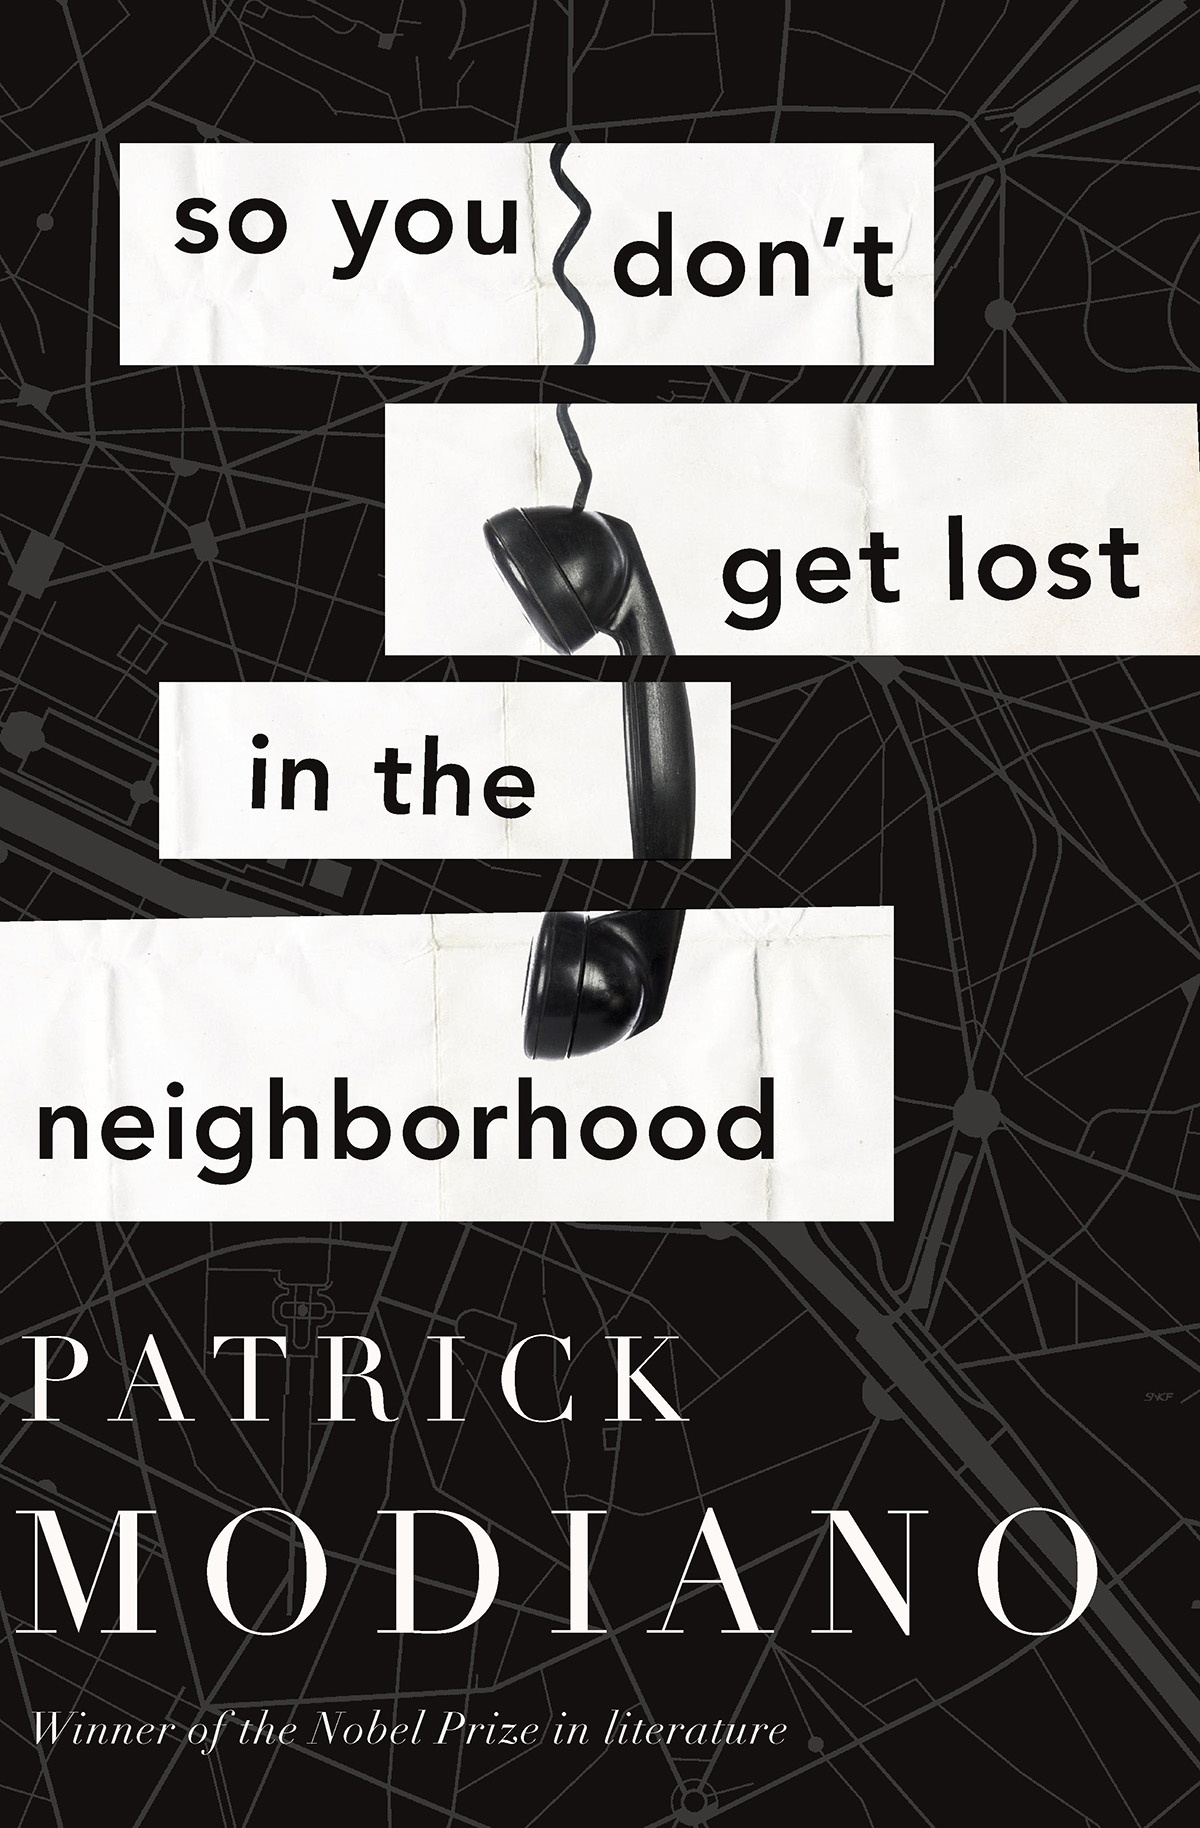 So You Don't Get Lost in the Neighborhood by Patrick Modiano